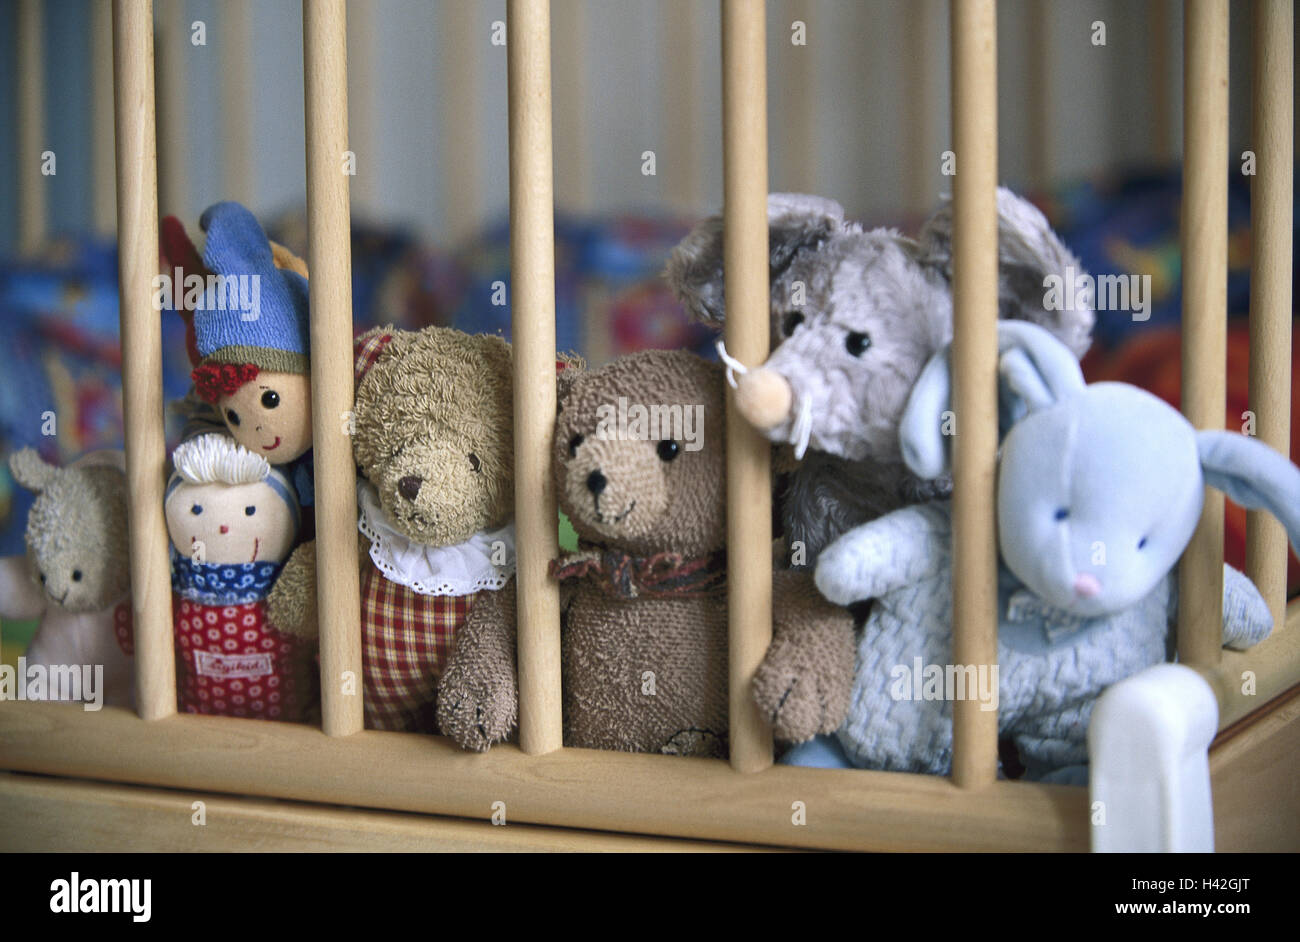 Cot, grid, soft toys, lined up, bed, playpen, cot, toys, toys, soft toys, soft animals, 'comforters', soft corner, unnoticed, abundance, toys abundance, mites, pollutants, toys, Still life, material recording Stock Photo